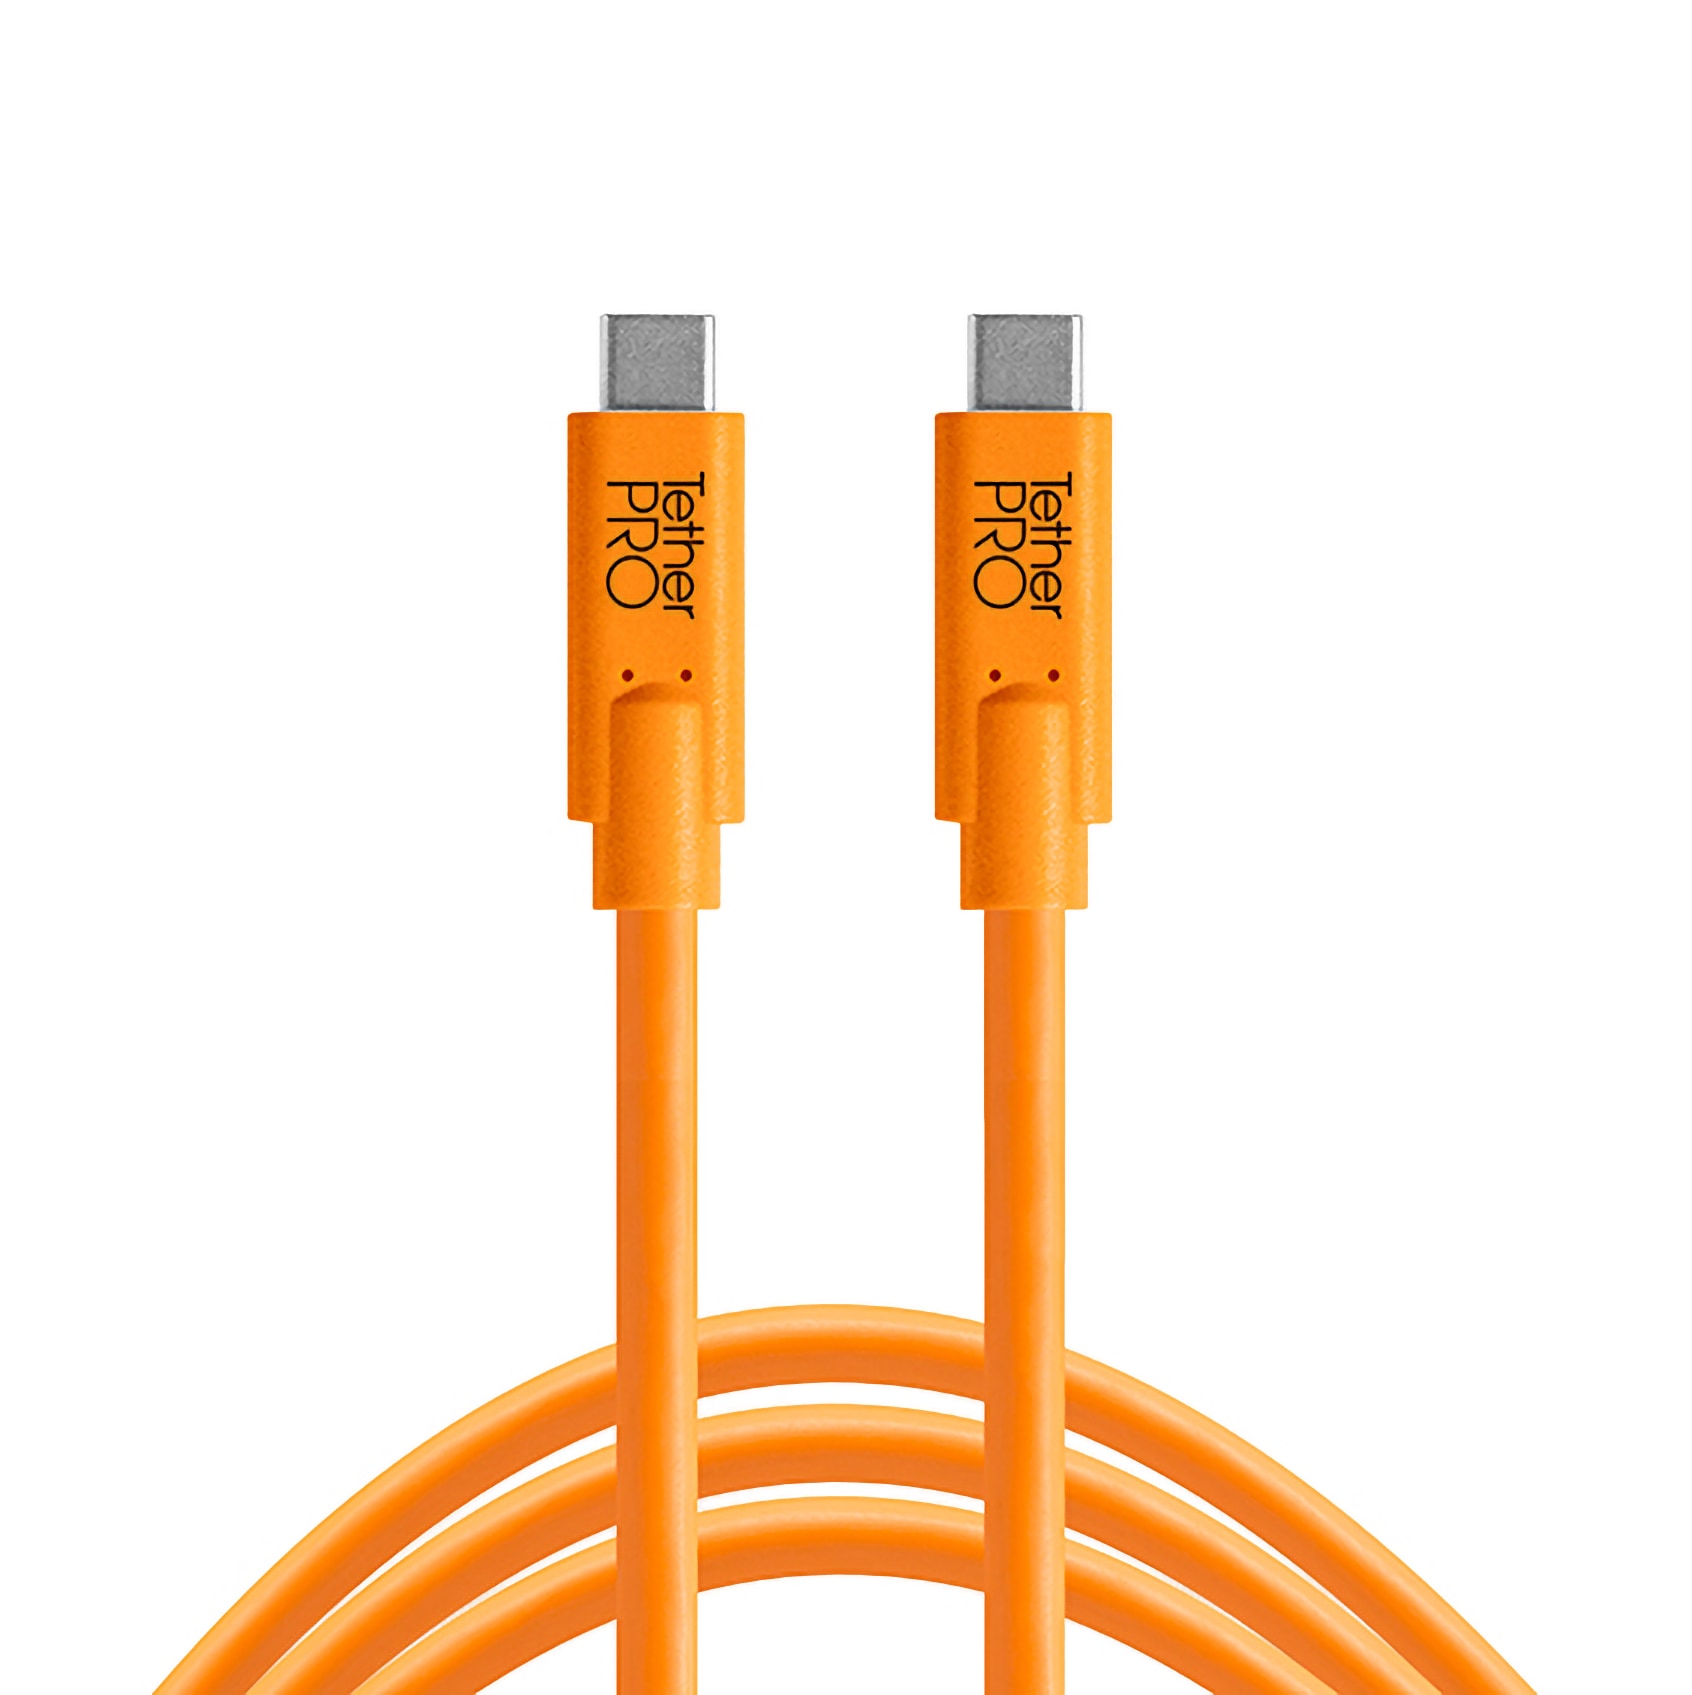 TThumbnail image for Tether Tools TetherPro USB Type-C Male to USB Type-C Male Cable (15', Orange)